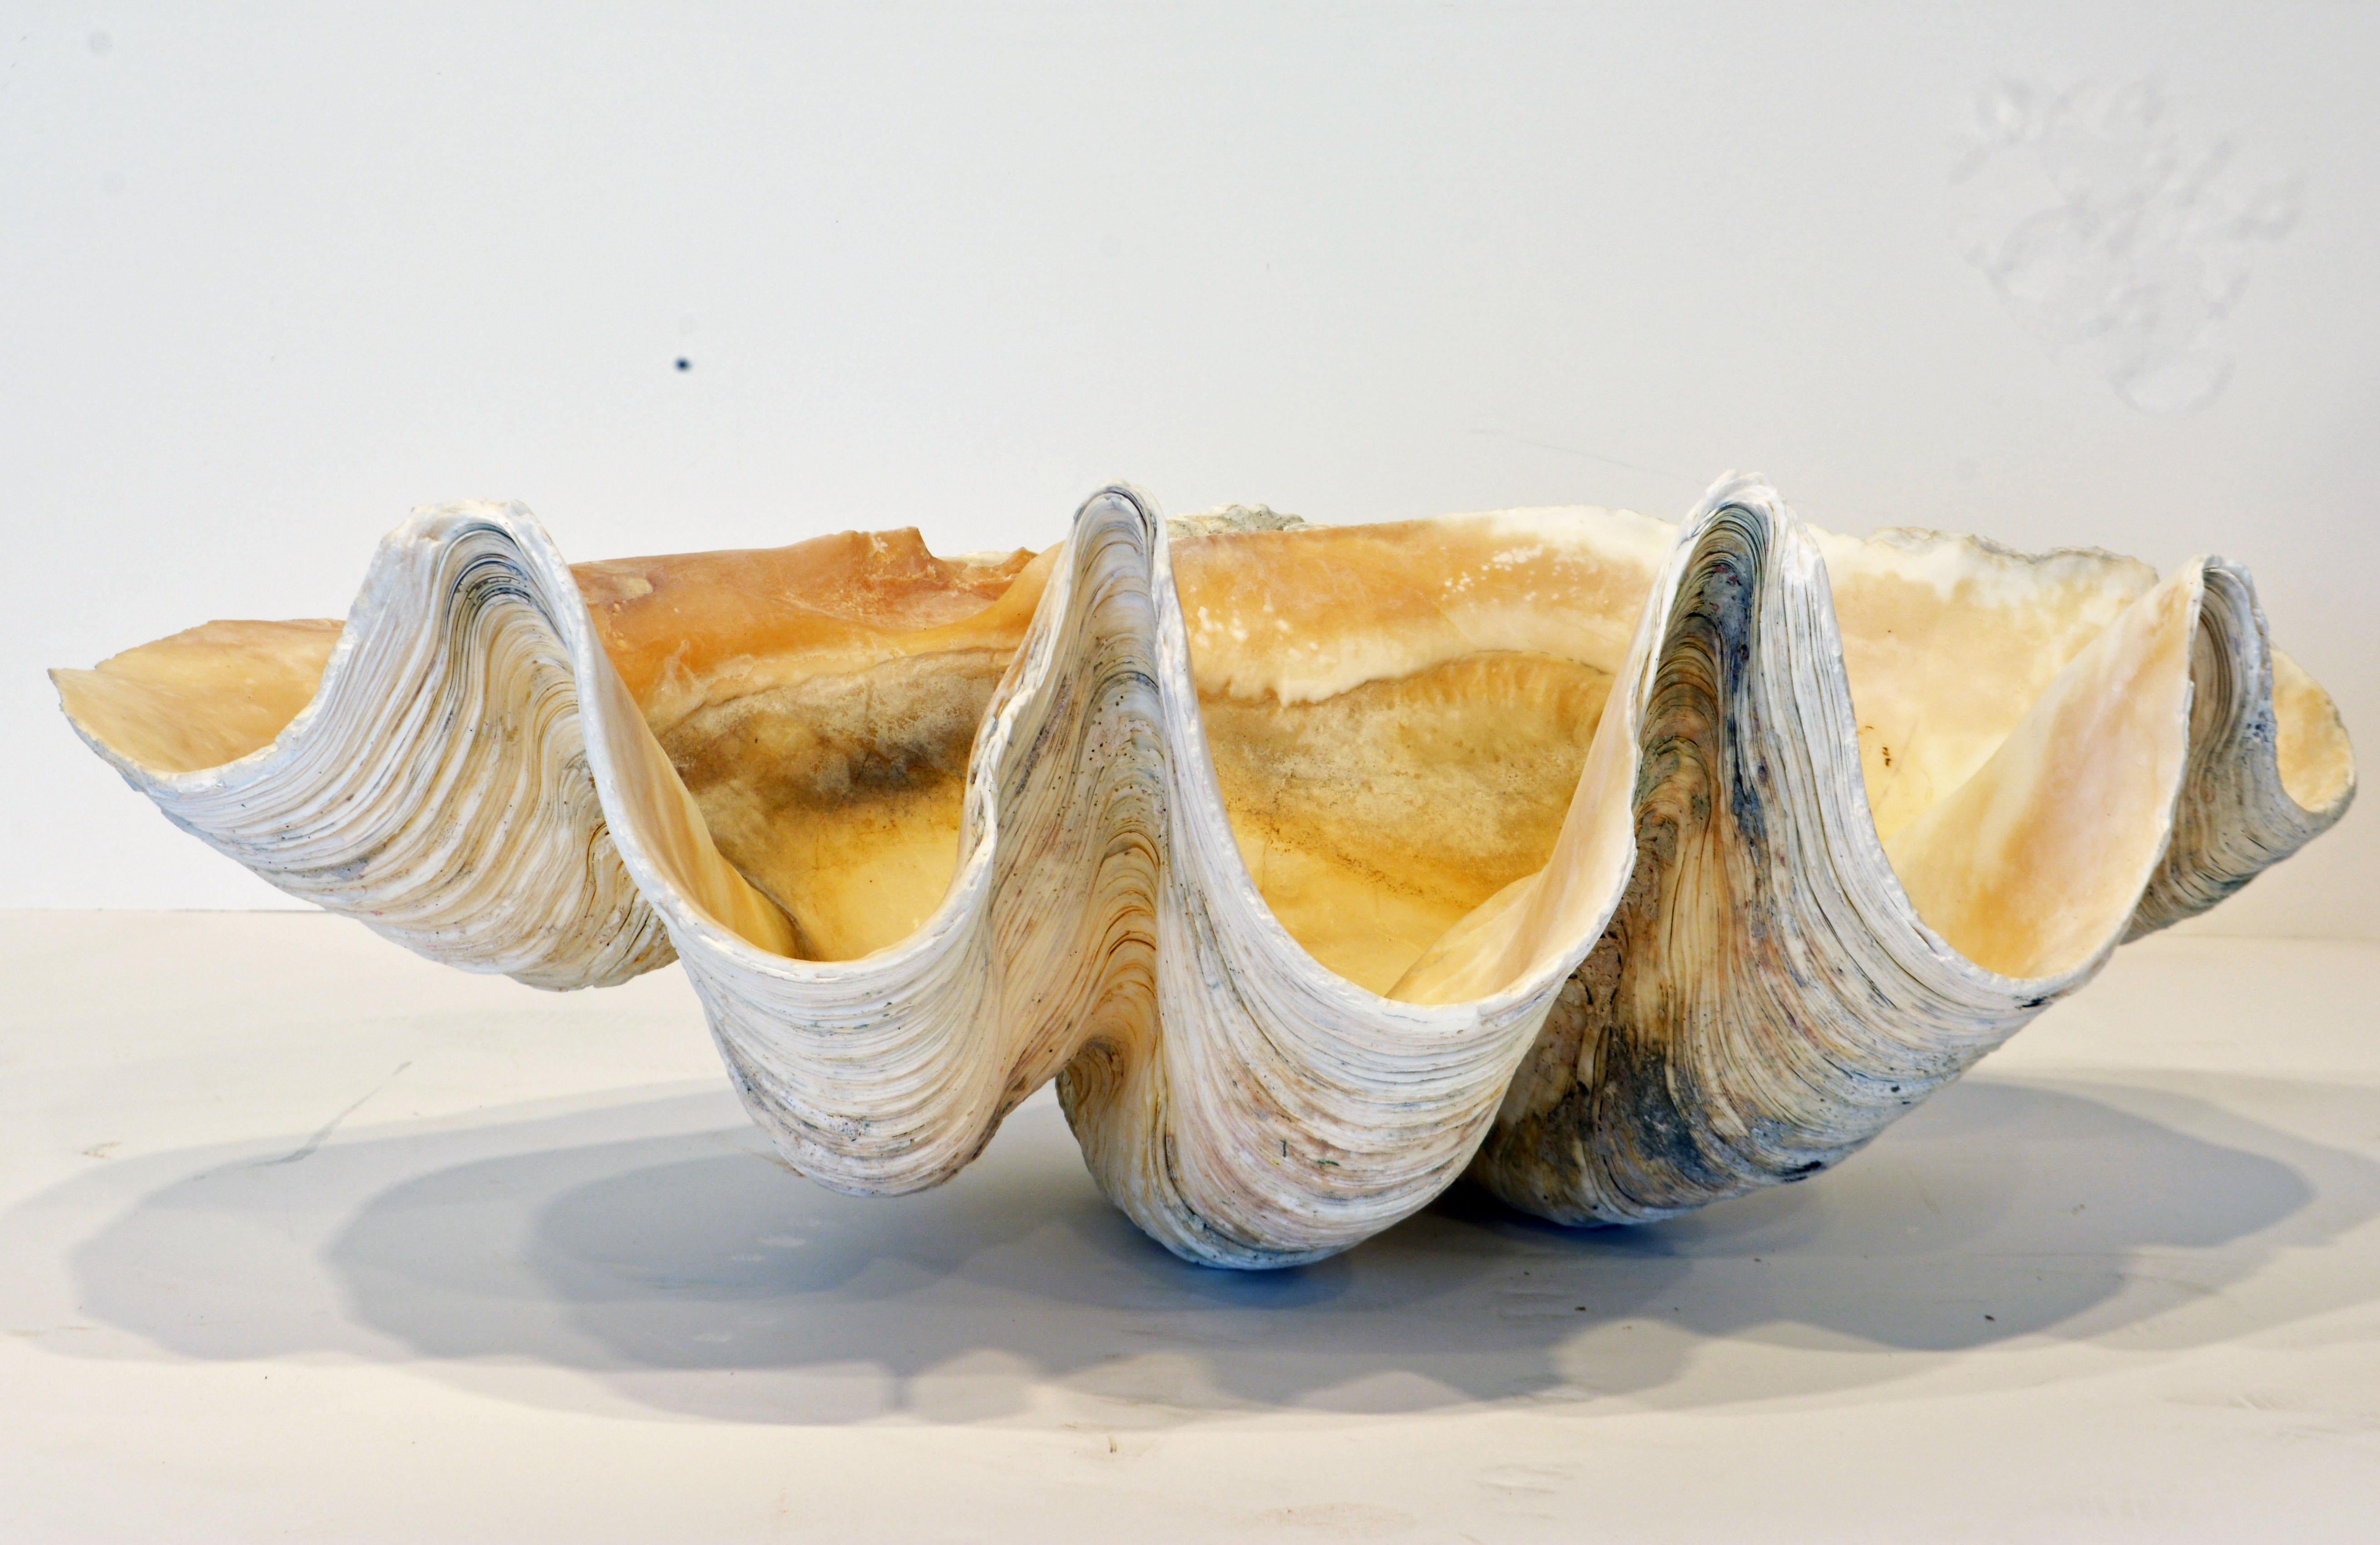 25 inches long this clam shell has great sculptural qualities and a subtle variation of organic colors.